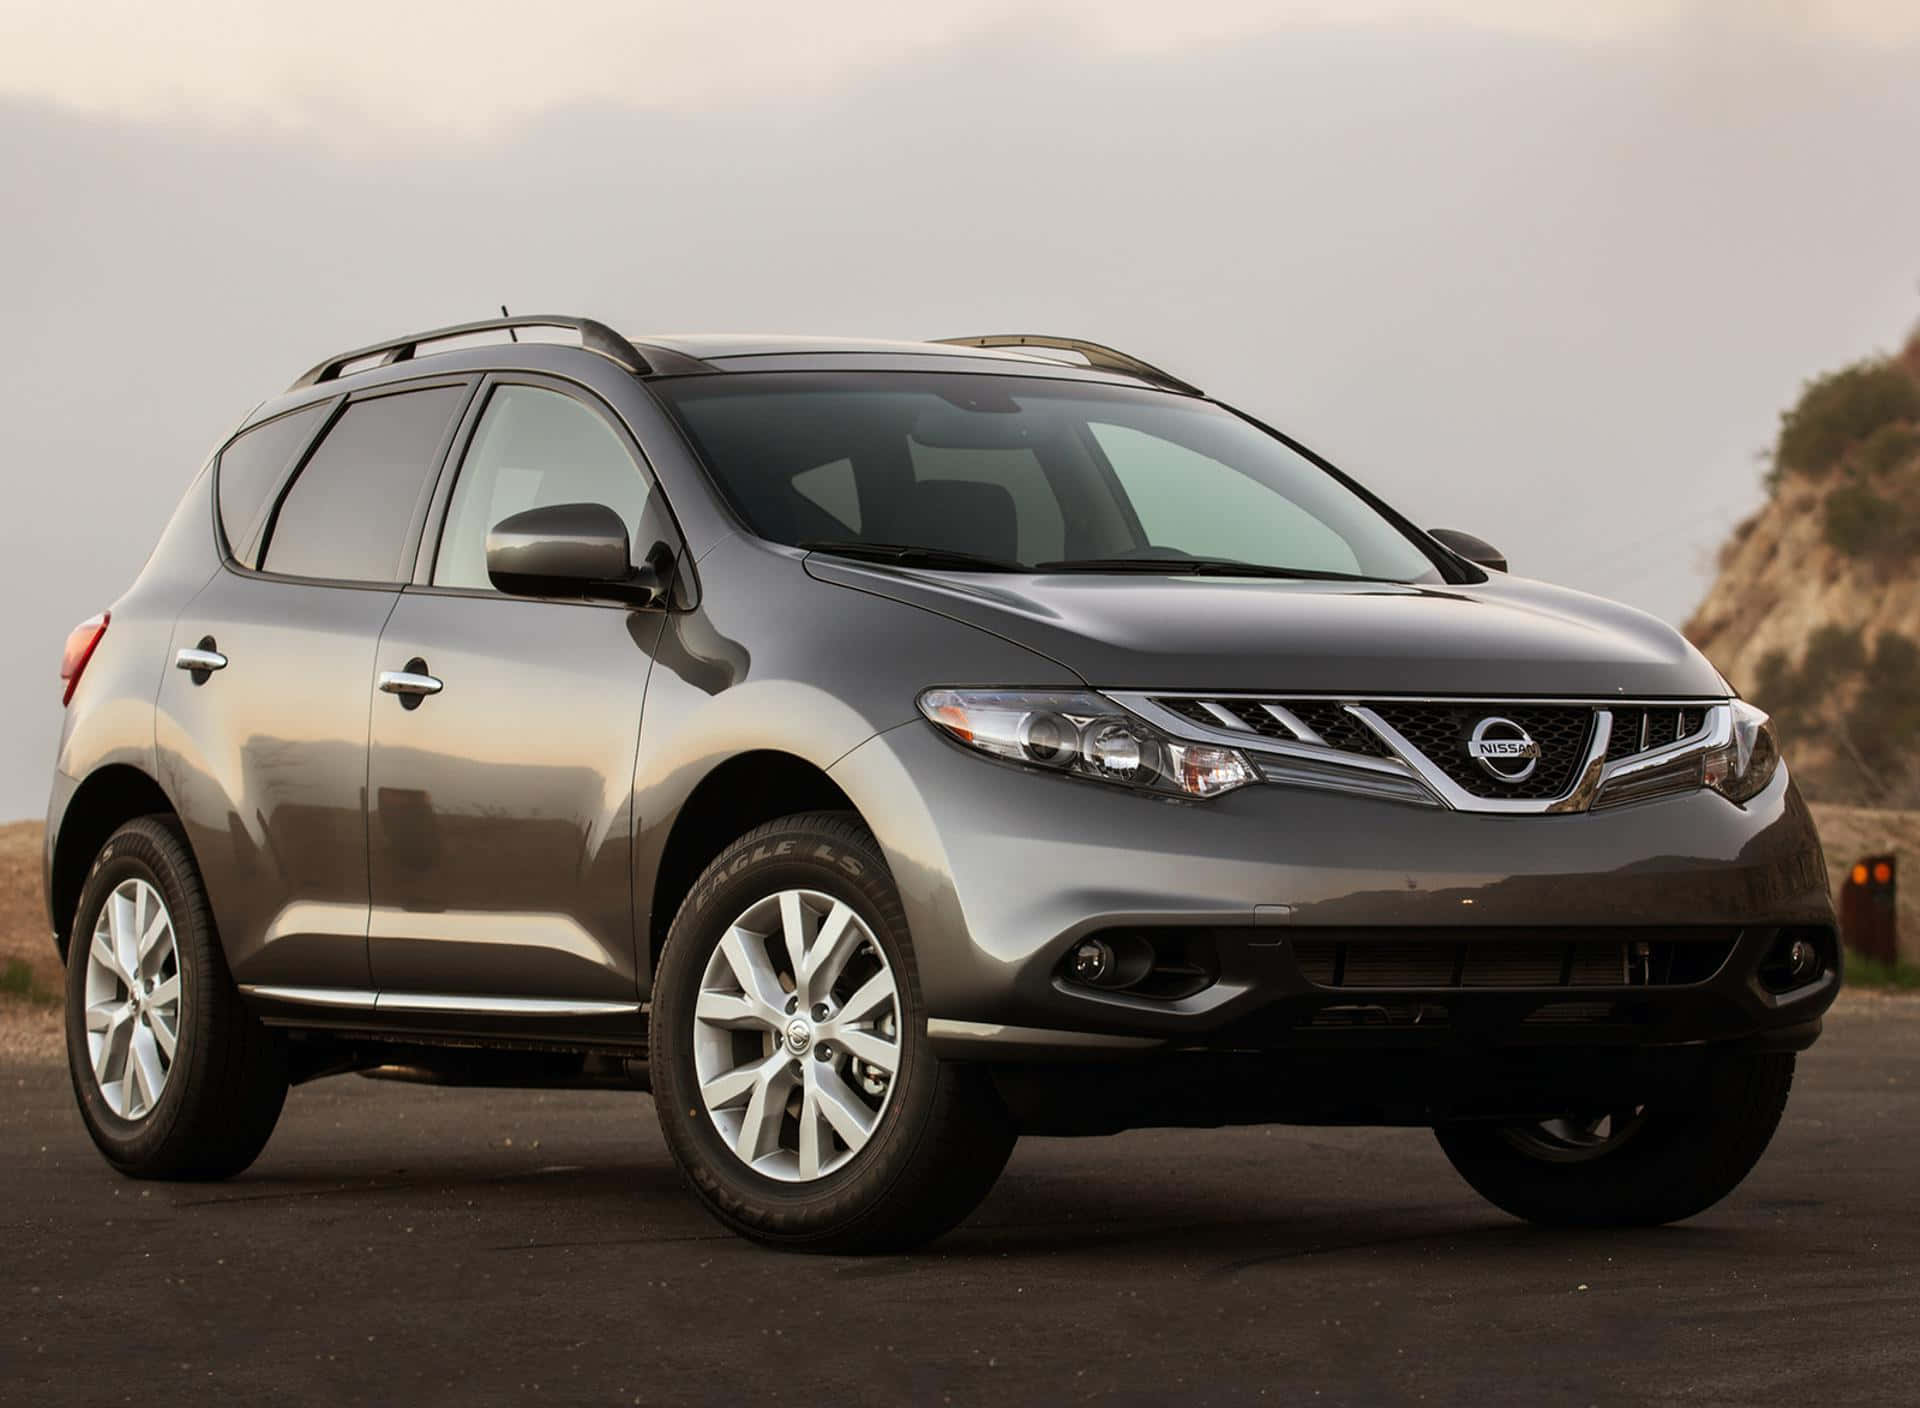 Captivating Nissan Murano in Action Wallpaper